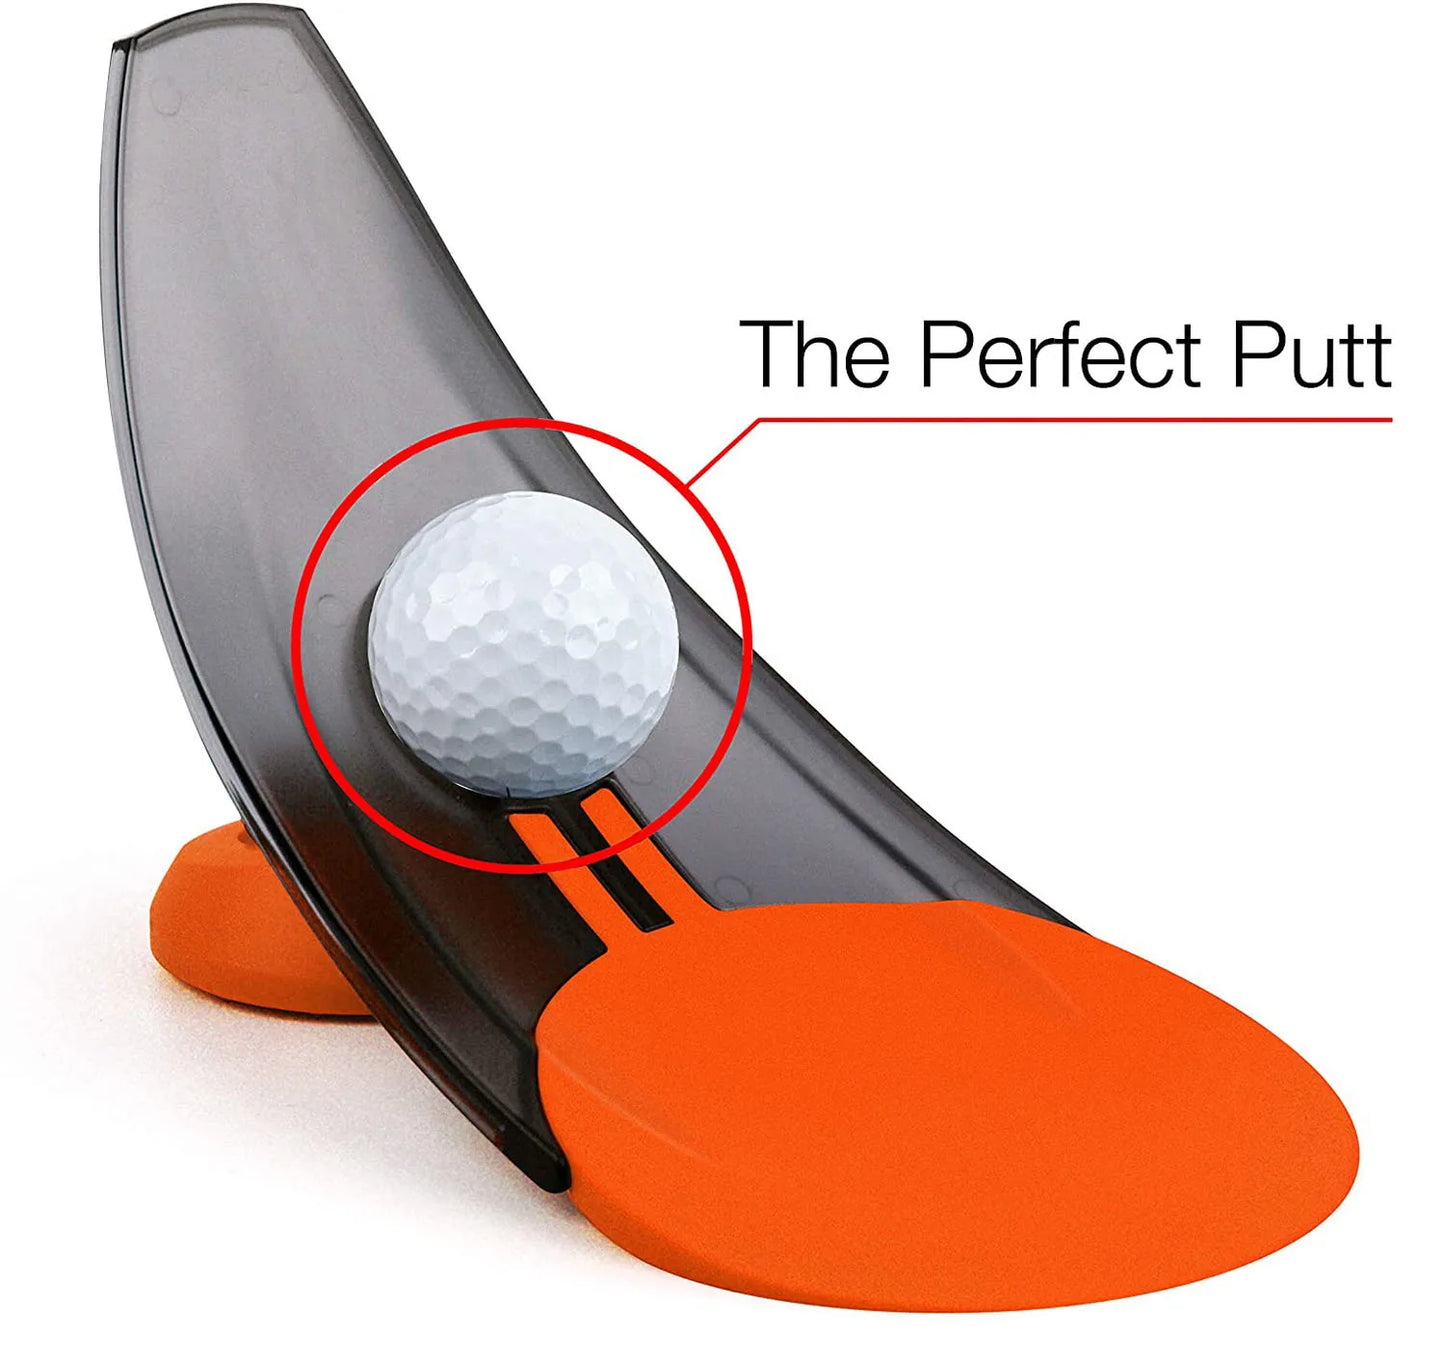 Golf Putter Trainer for Indoor and Outdoor